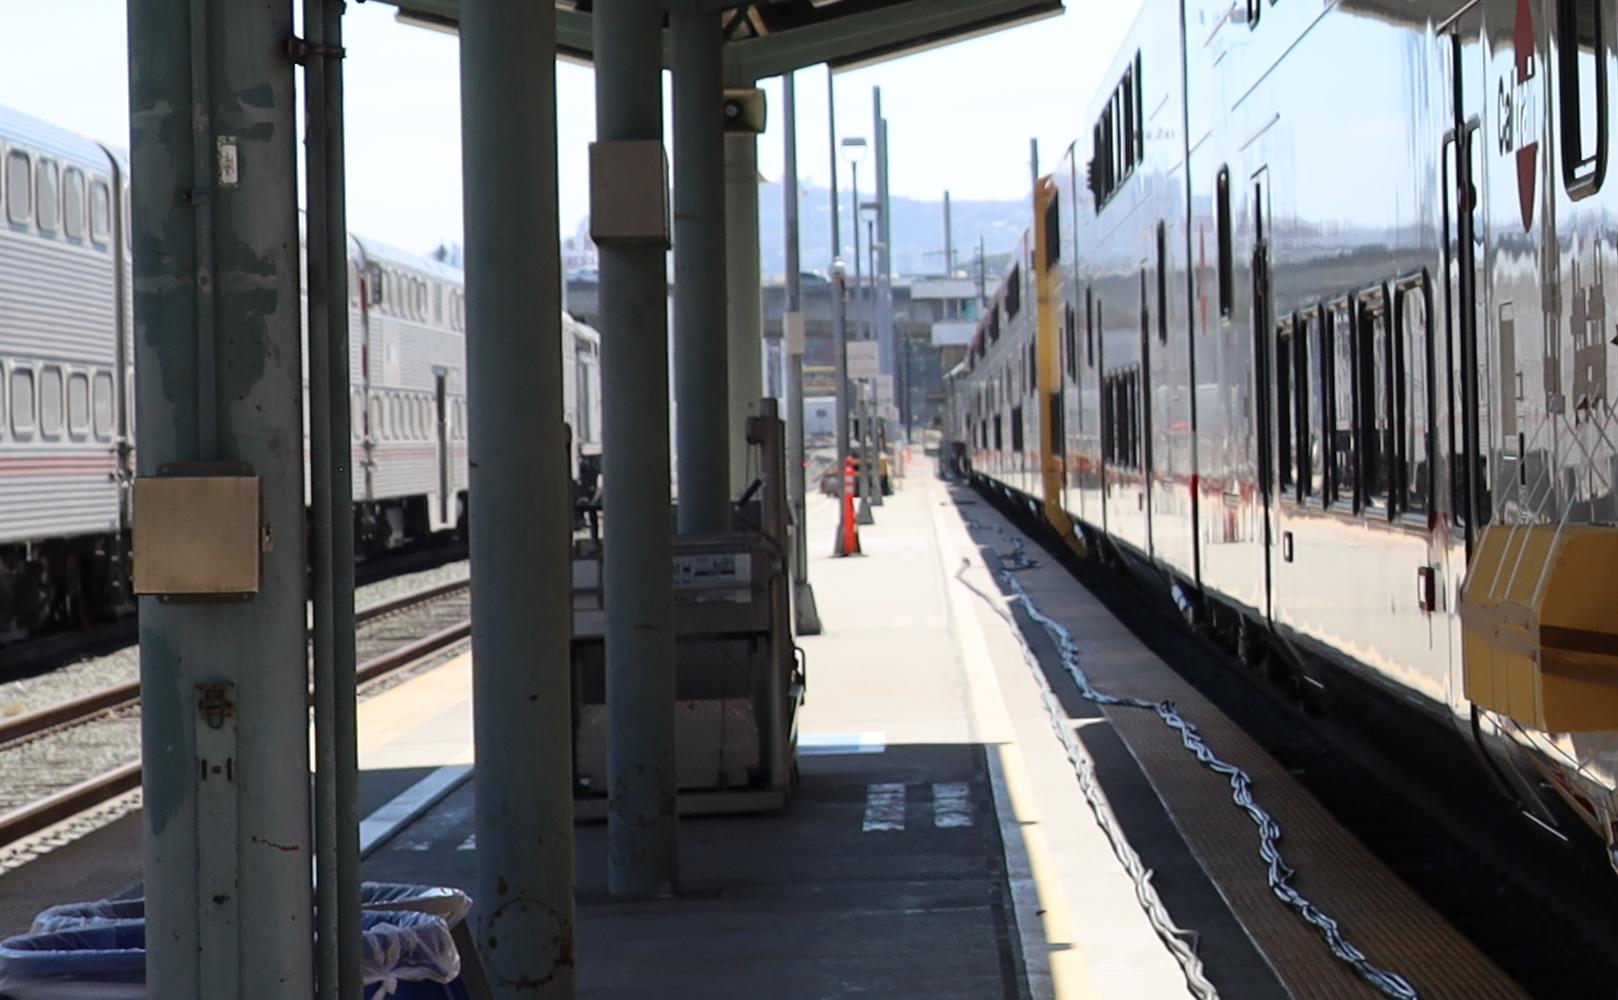 Electric Train arrives at San Francisco Station for the first time